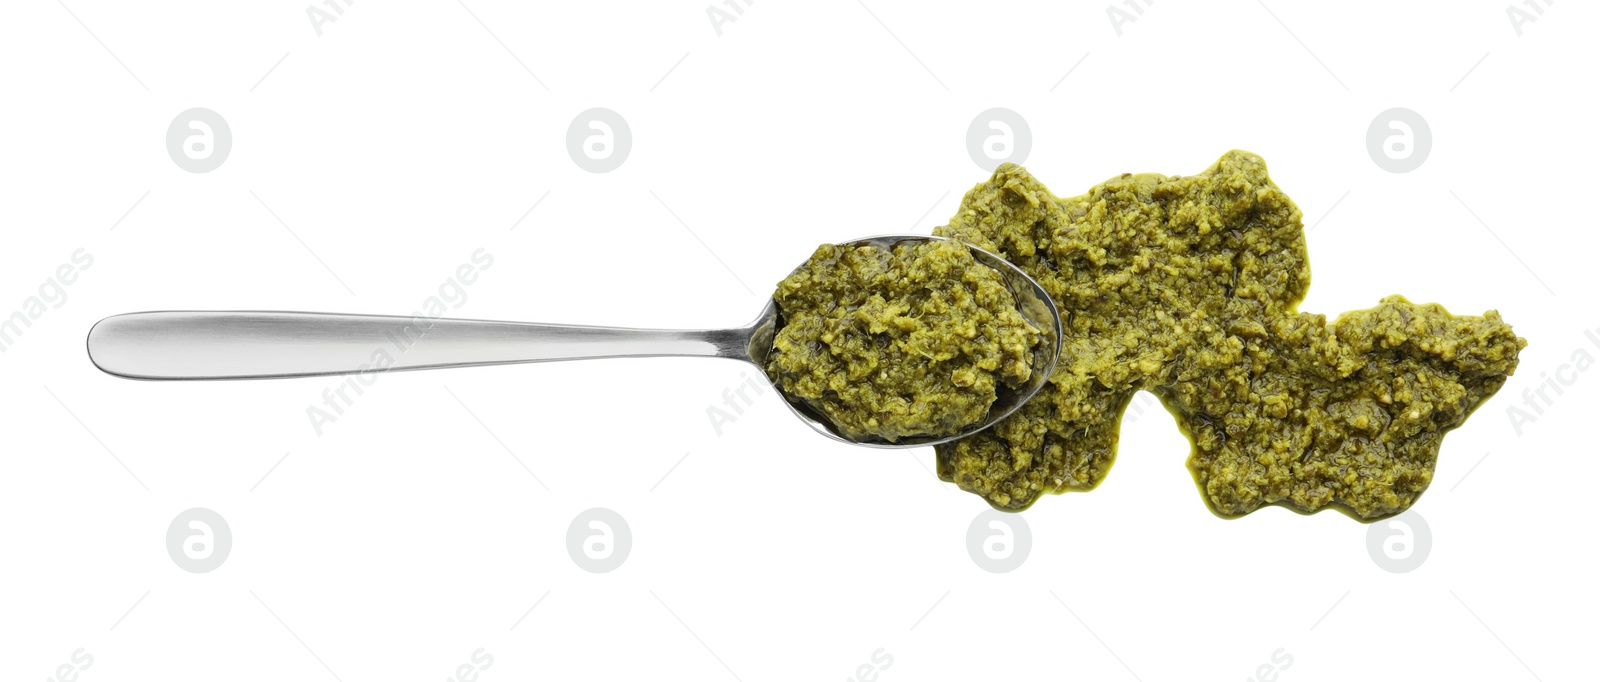 Photo of Tasty pesto sauce and spoon isolated on white, top view